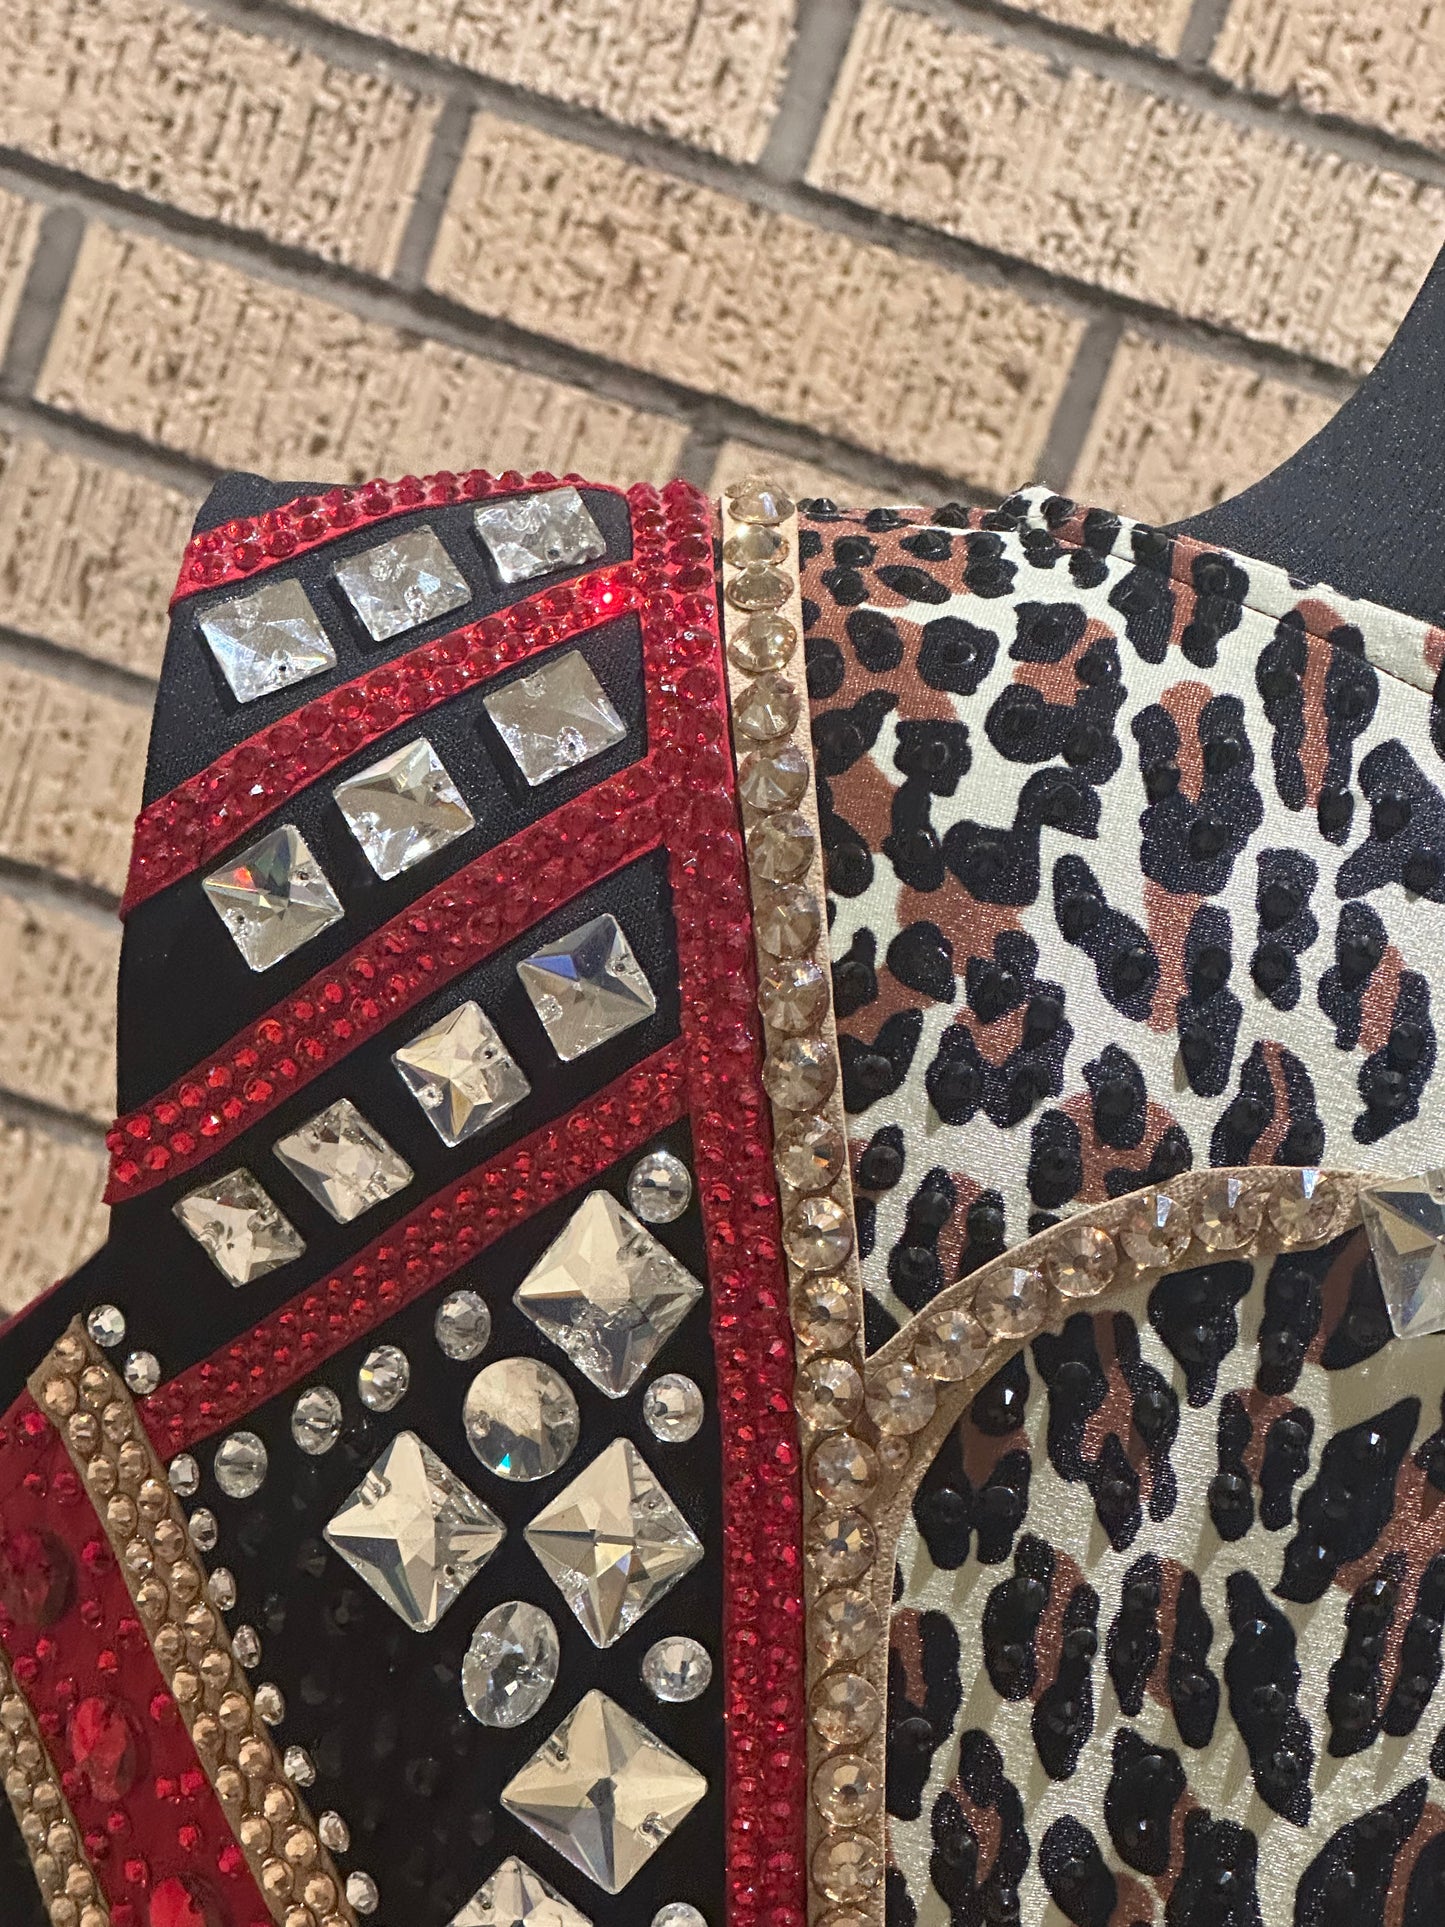 Large vest with black, gold and red with clear crystals and leopard print